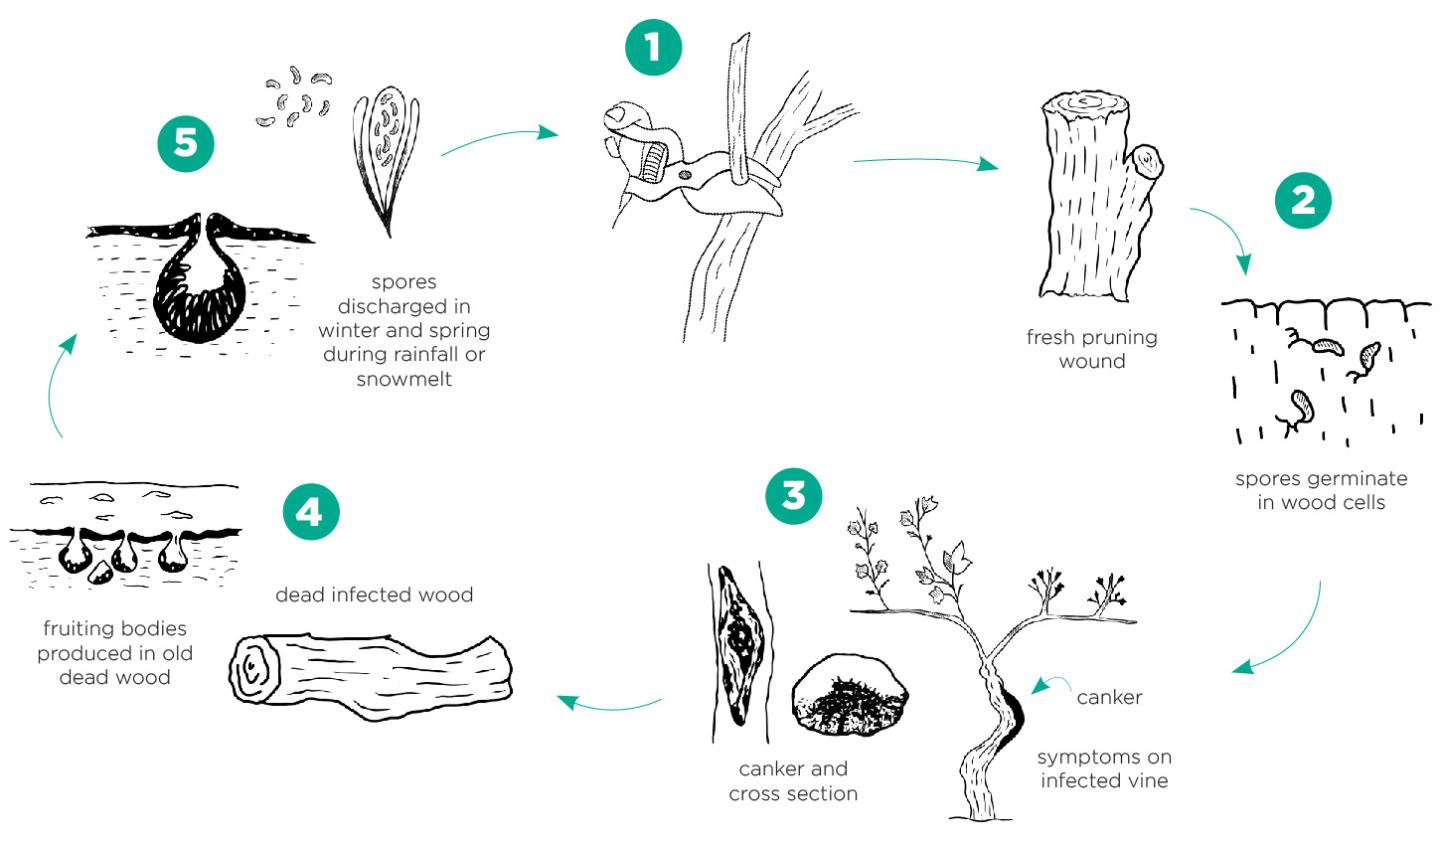 1.Fresh pruning wound. 2. Spores germinate in wood cells. 3. Canker symptoms on infected vine. 4. Fruiting bodies produced in old dead wood. 5. Spores discharged in winter and spring during rainfall or snowmelt.